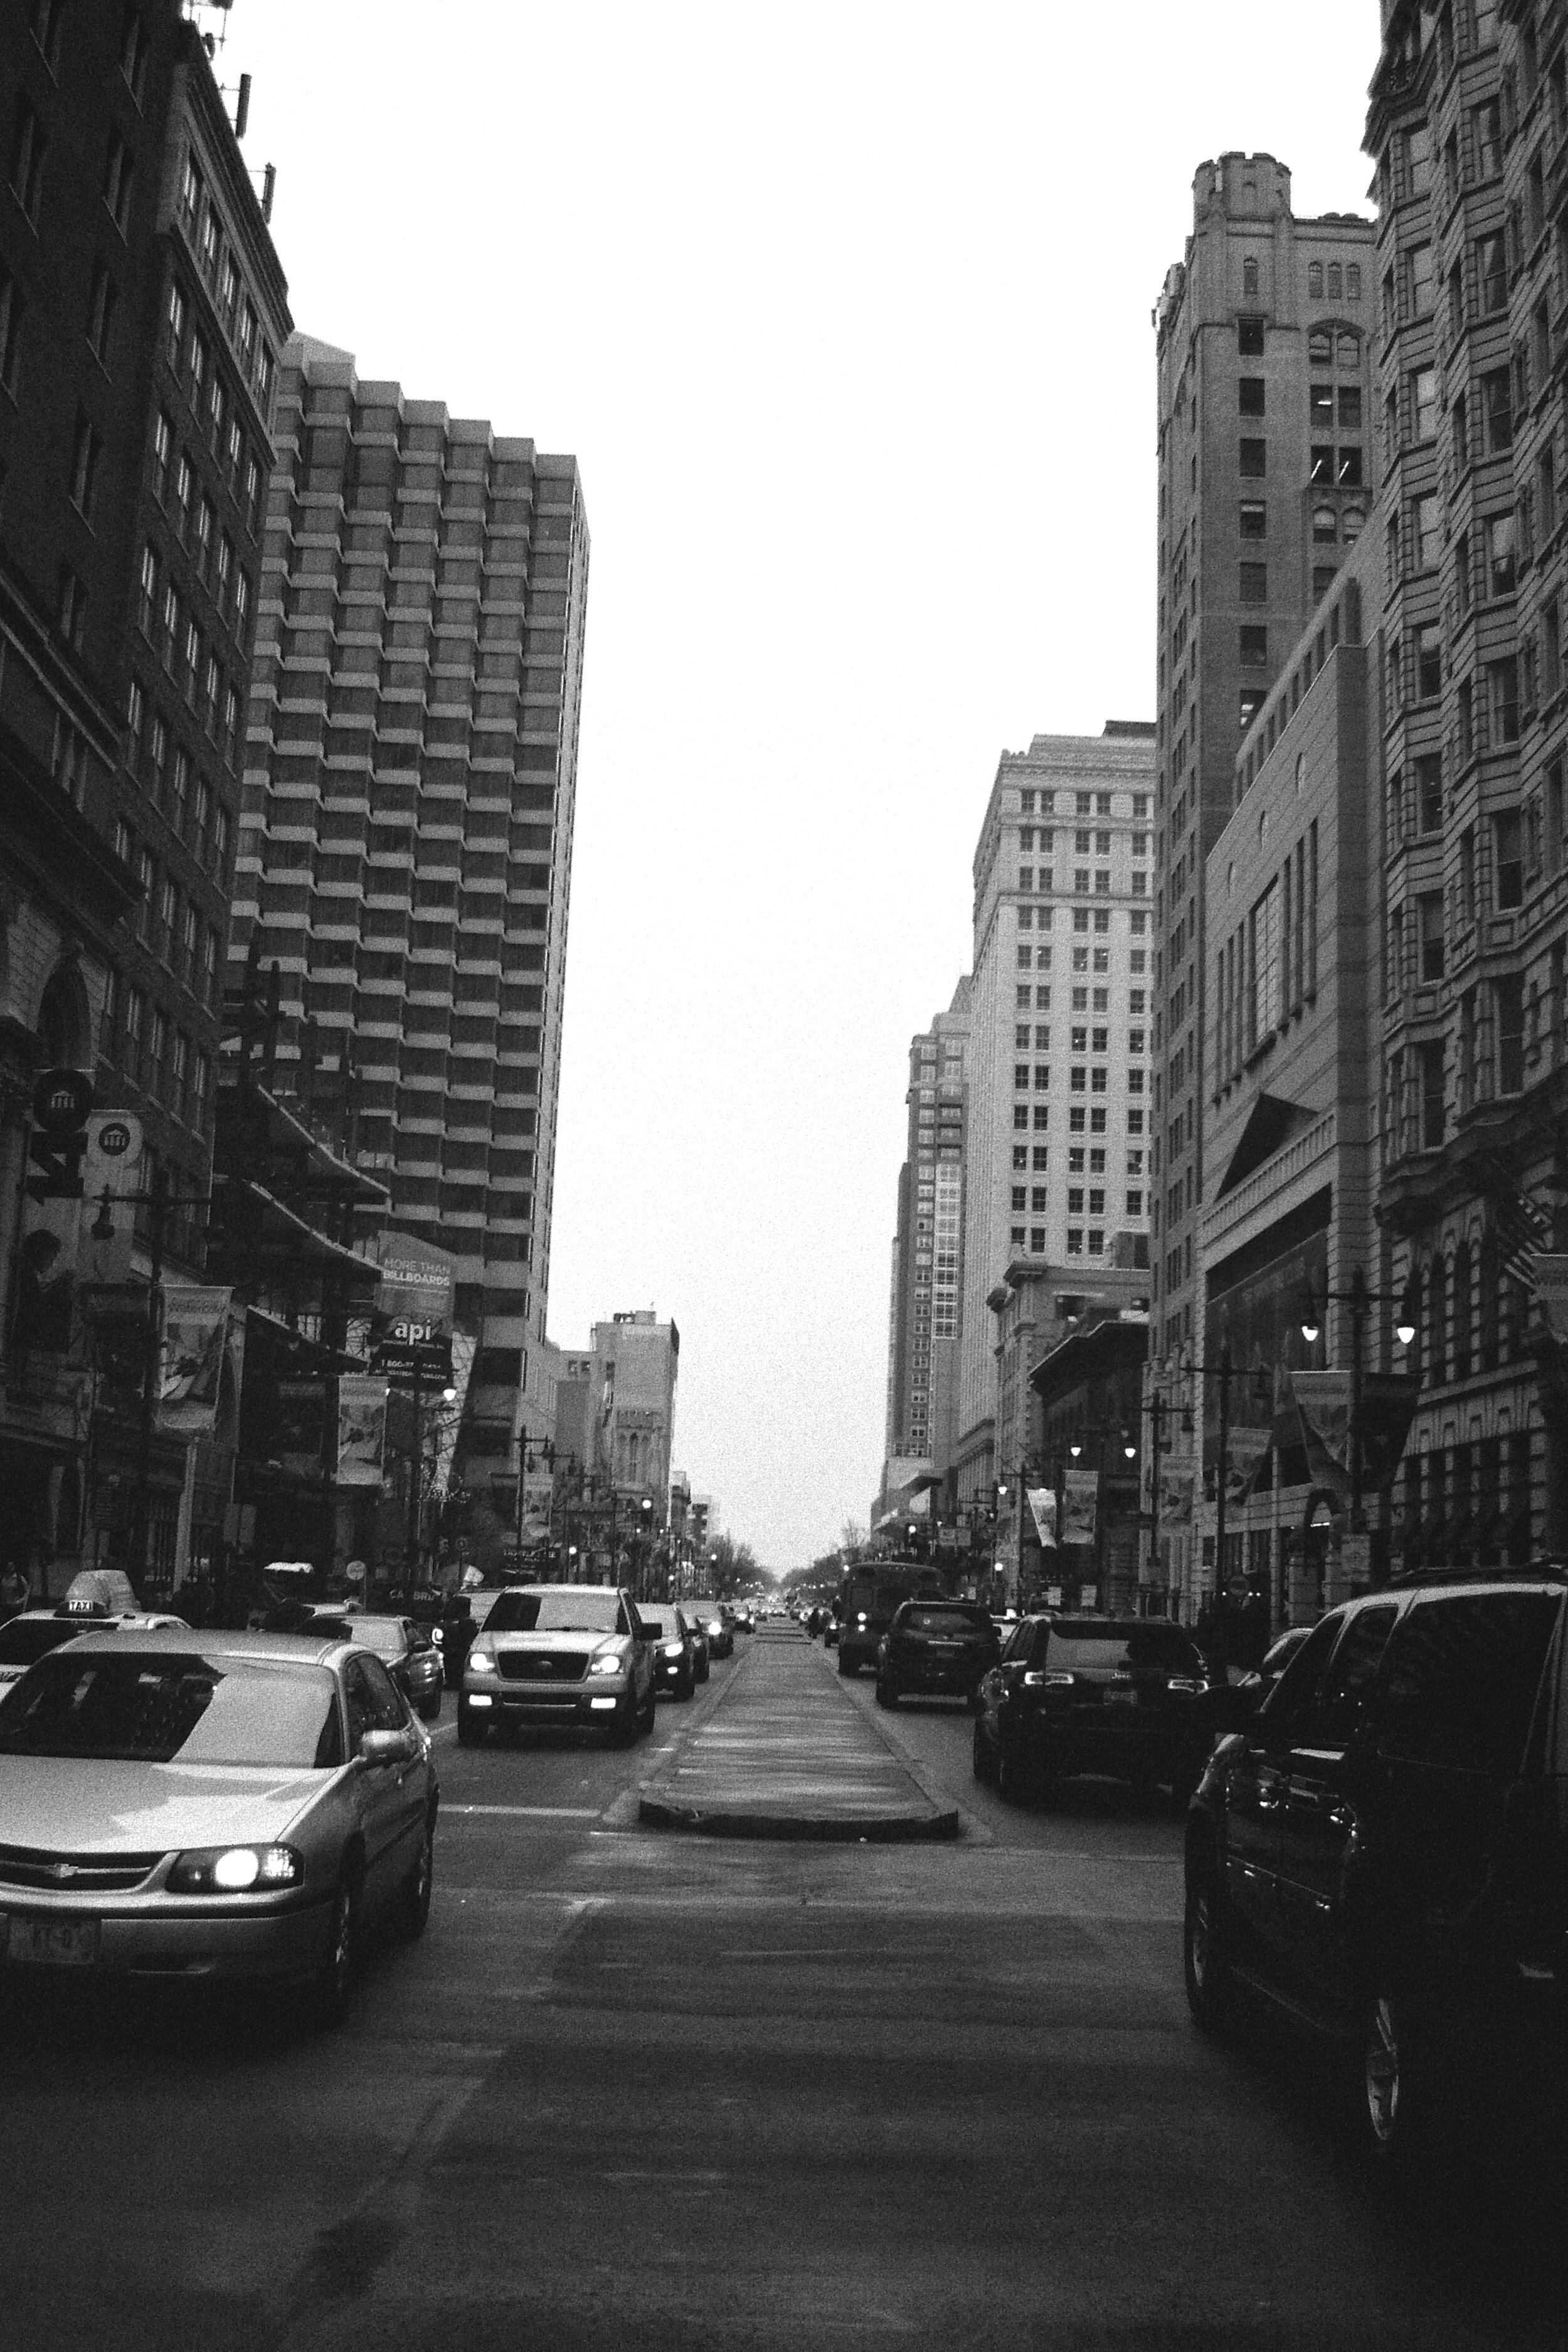 South – A typical Broad Street shot showing the converging effect of a normal lens on perspective – note how the buildings seem to lean in towards each other.